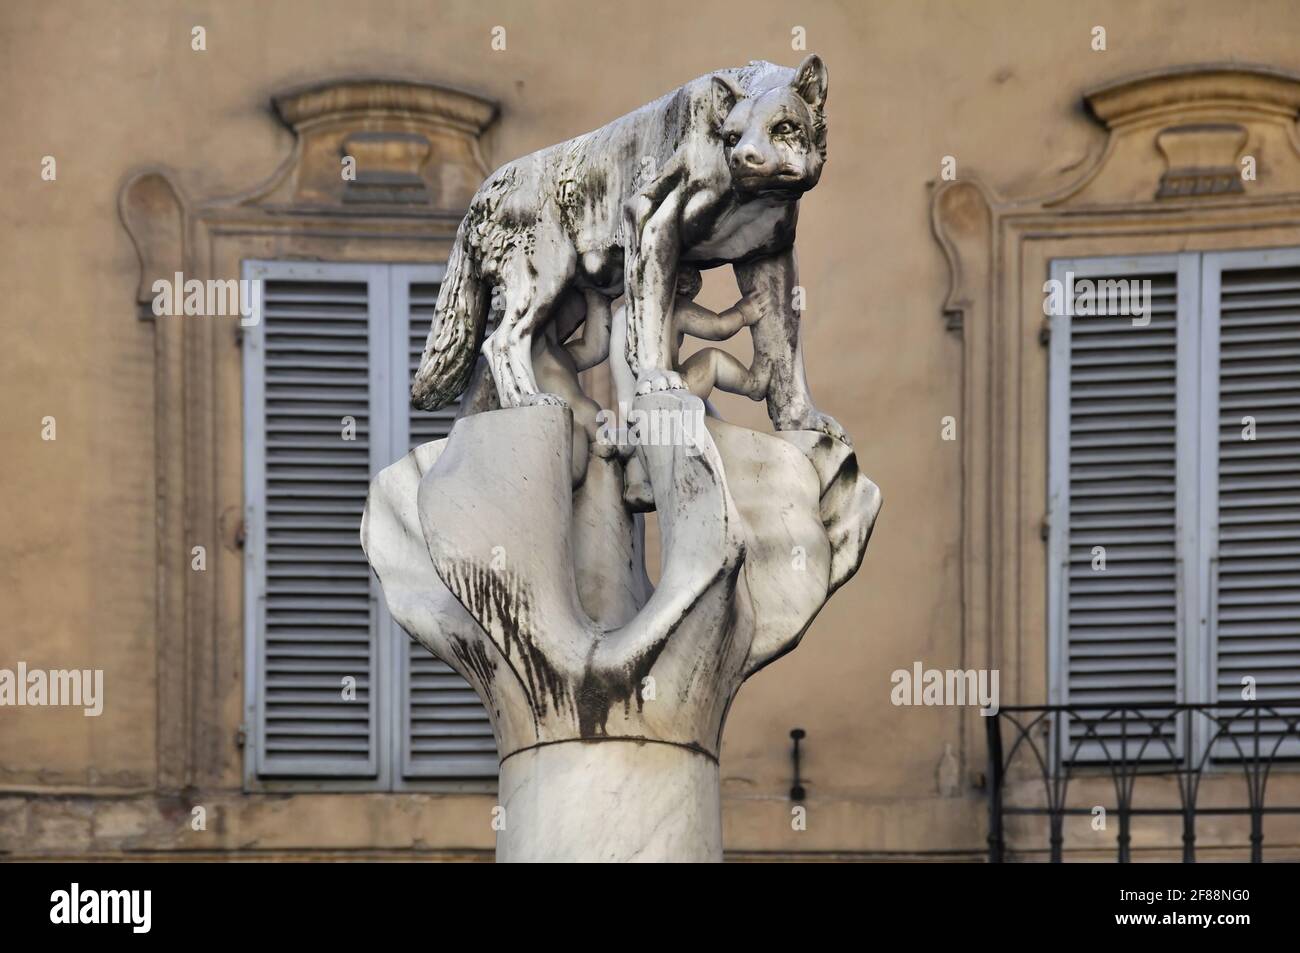 Statue of Romulus and Remus being suckled by the she-wolf in Siena, Siena Province, Tuscany, Italy. Stock Photo